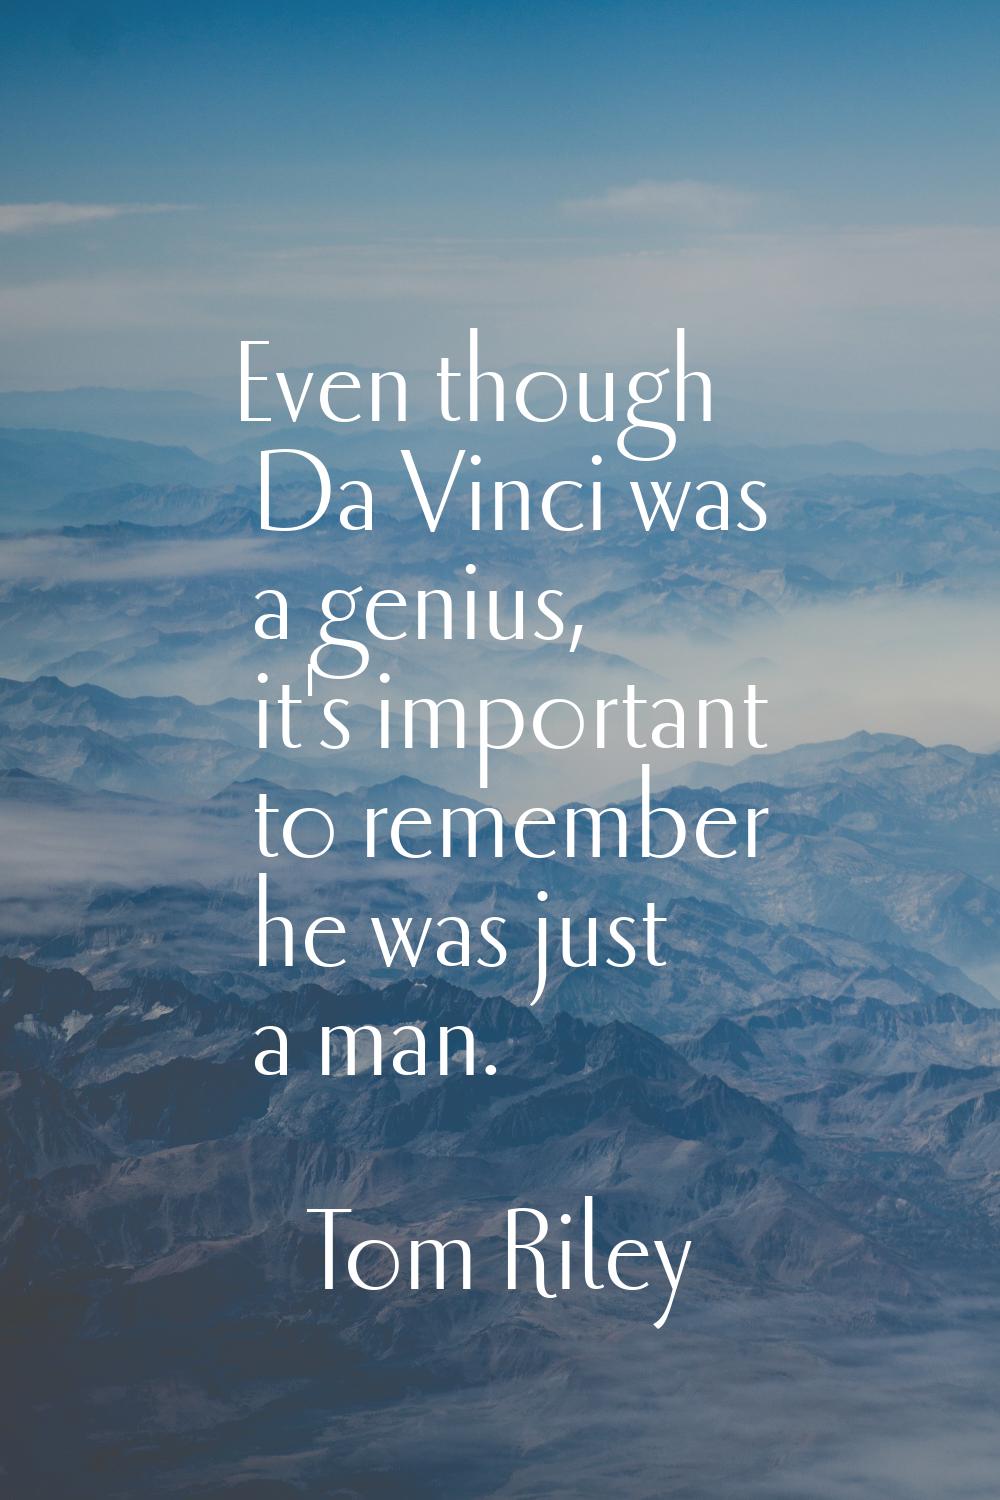 Even though Da Vinci was a genius, it's important to remember he was just a man.